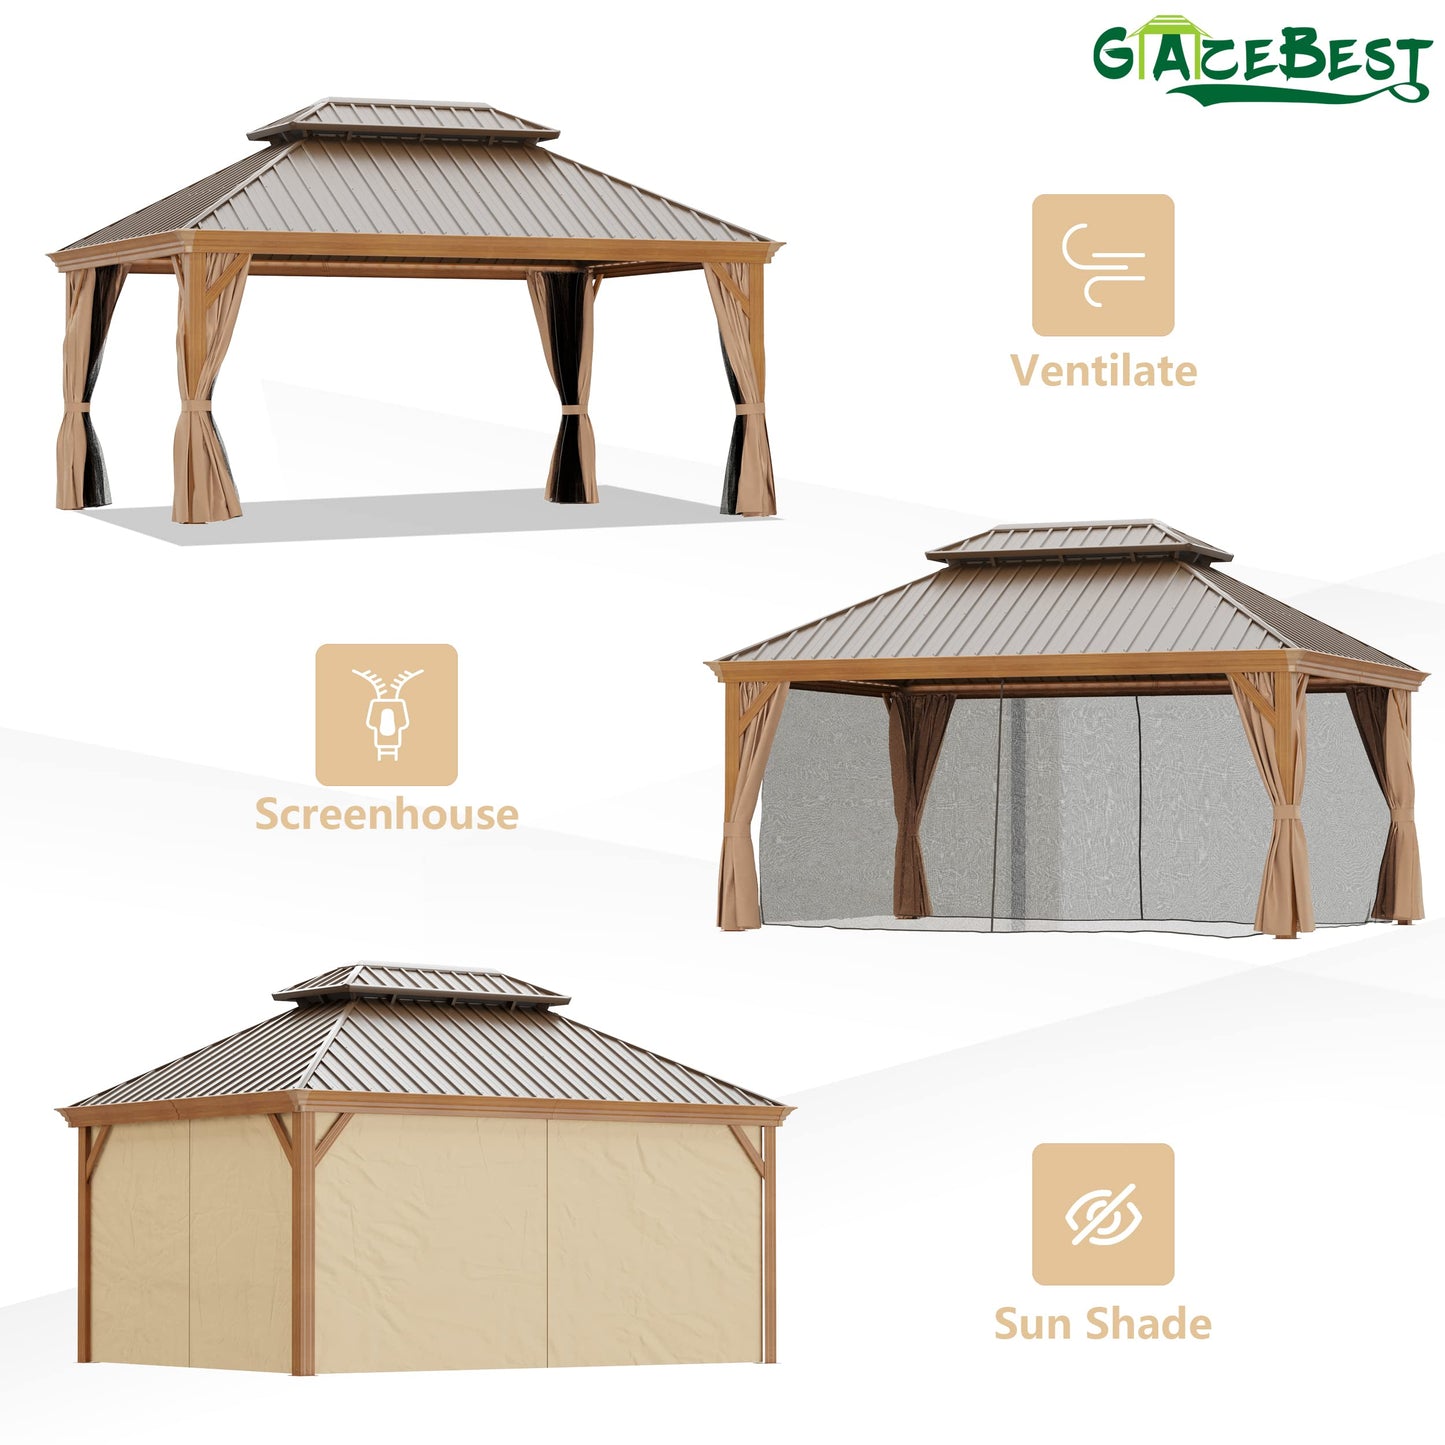 GAZEBEST 12' X 16' Hardtop Gazebo Outdoor Aluminum Patio Gazebo Double Roof Galvanized Steel Gazebo Canopy Wooden Finish Coated with Netting and Curtains,for Garden Patio,Patio Backyard,Deck and Lawns